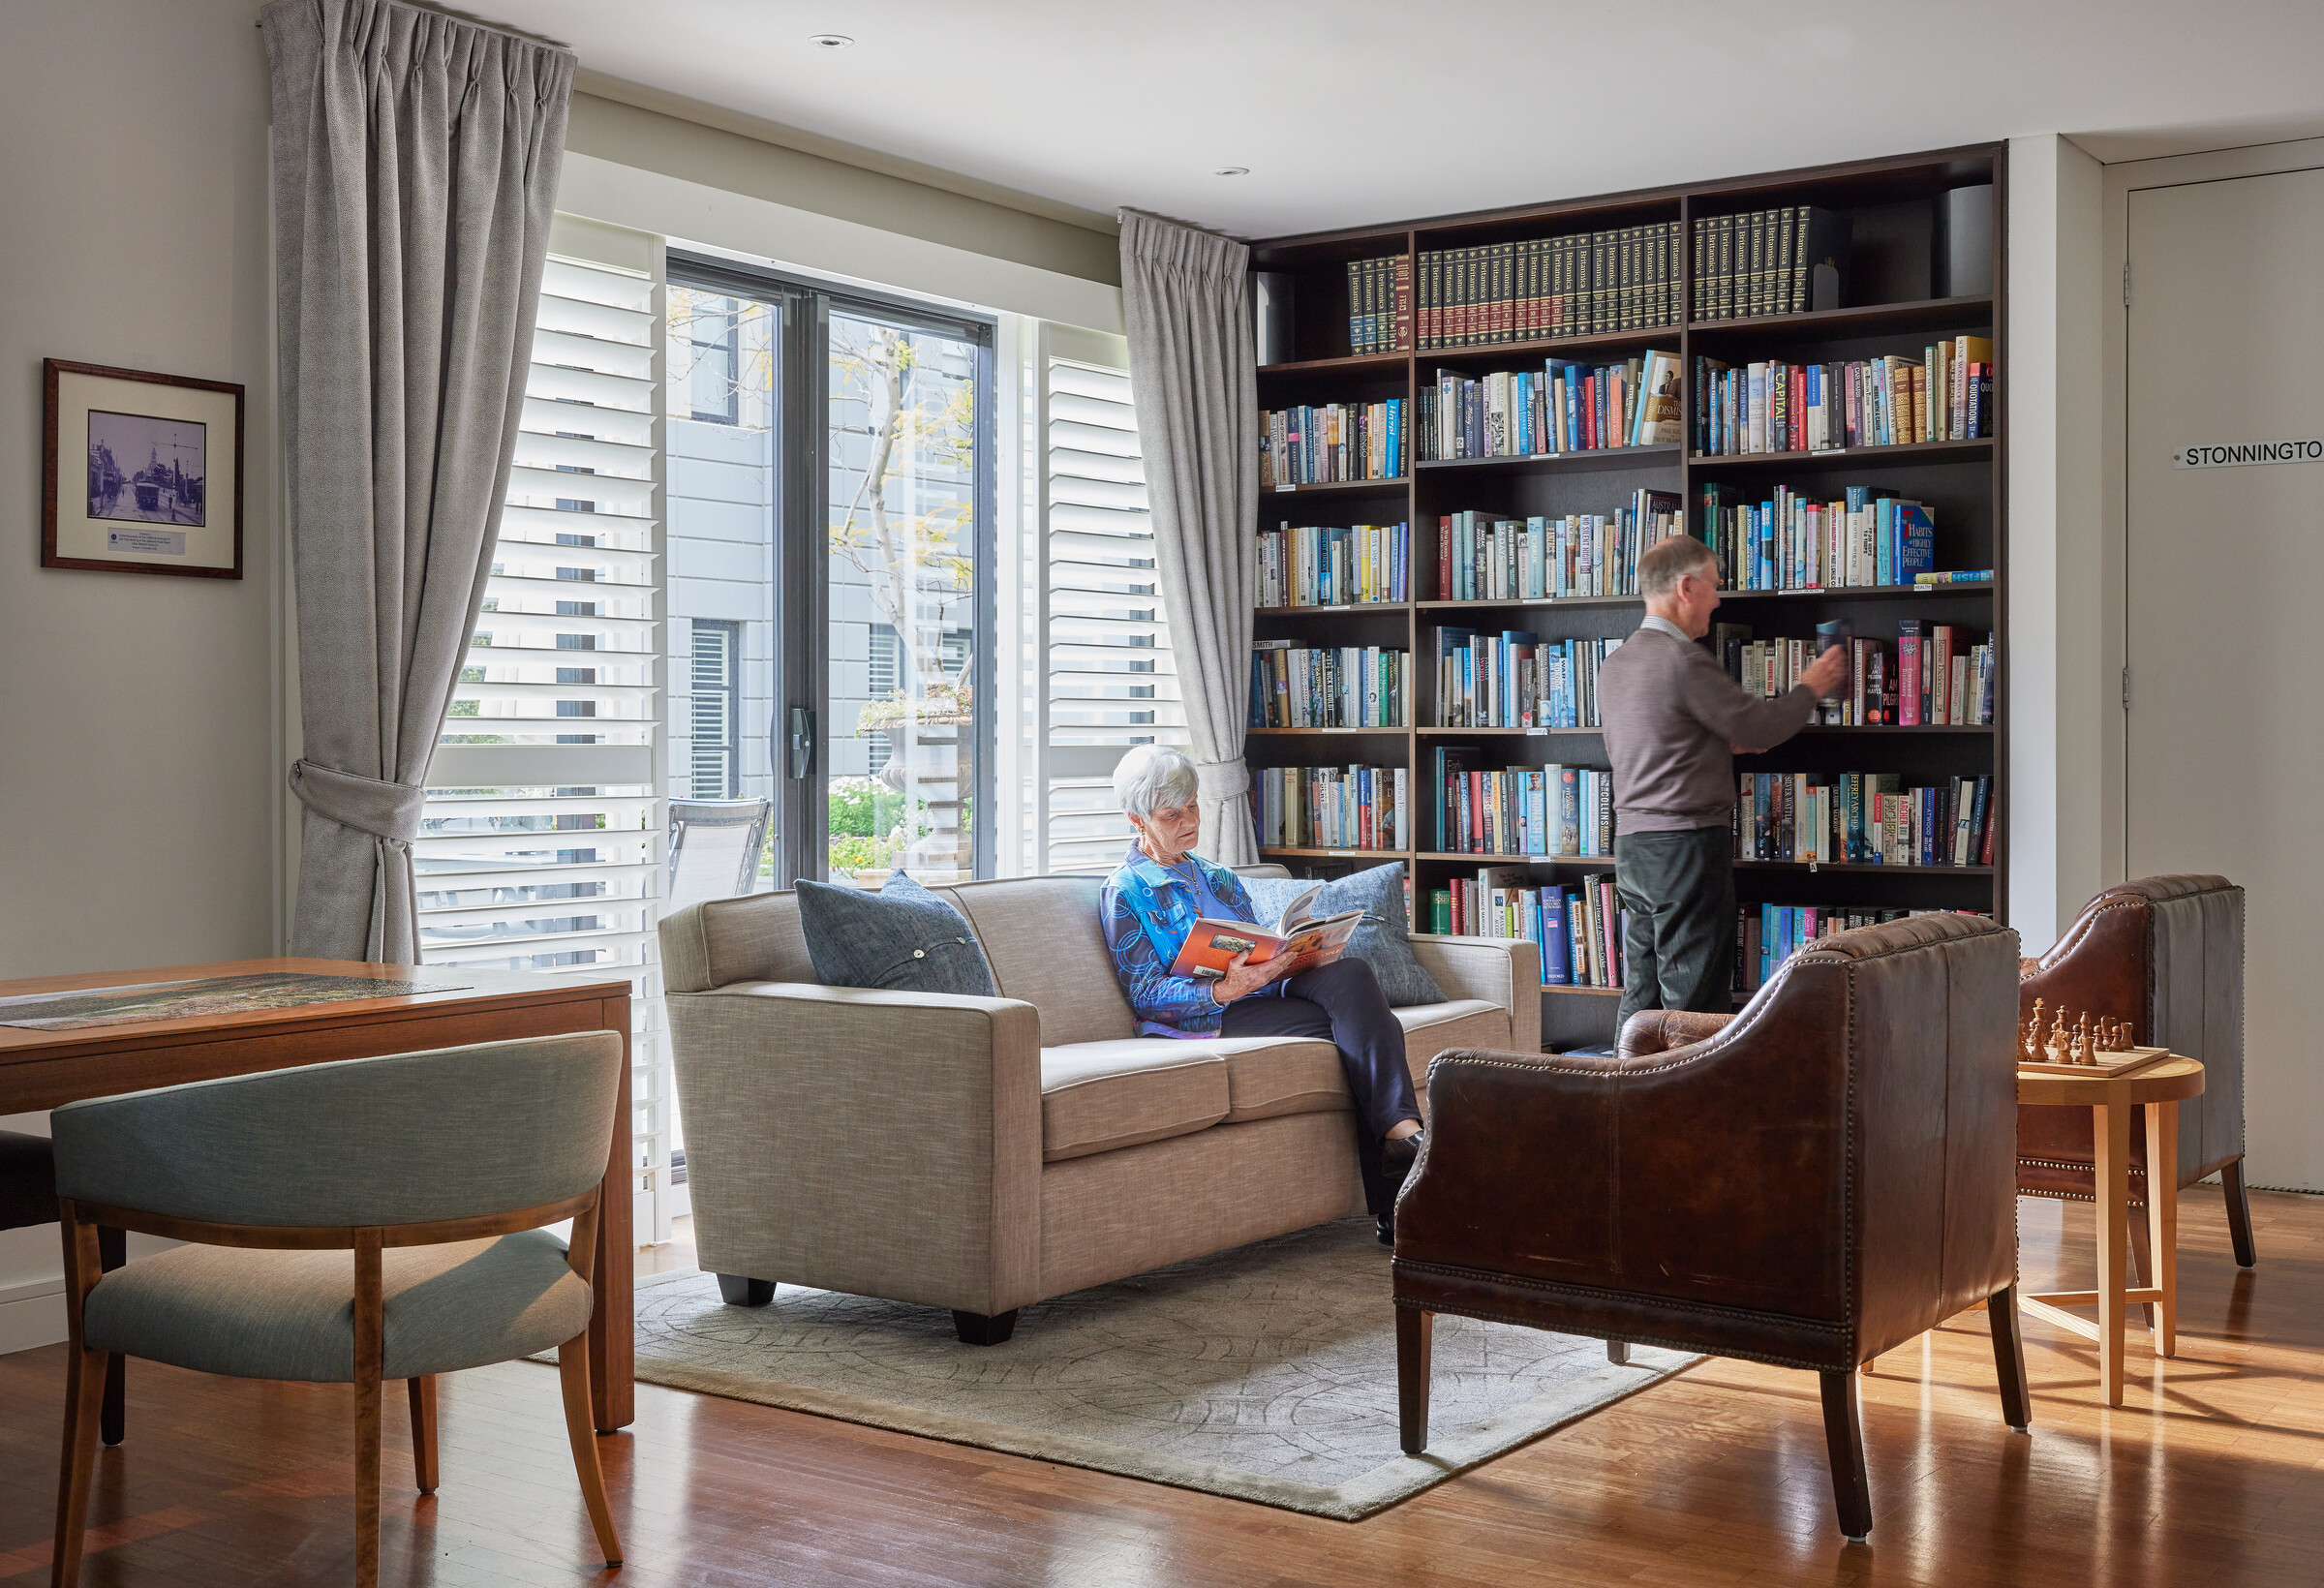 Menzies Malvern couple in library with stocked bookshelves and reading area